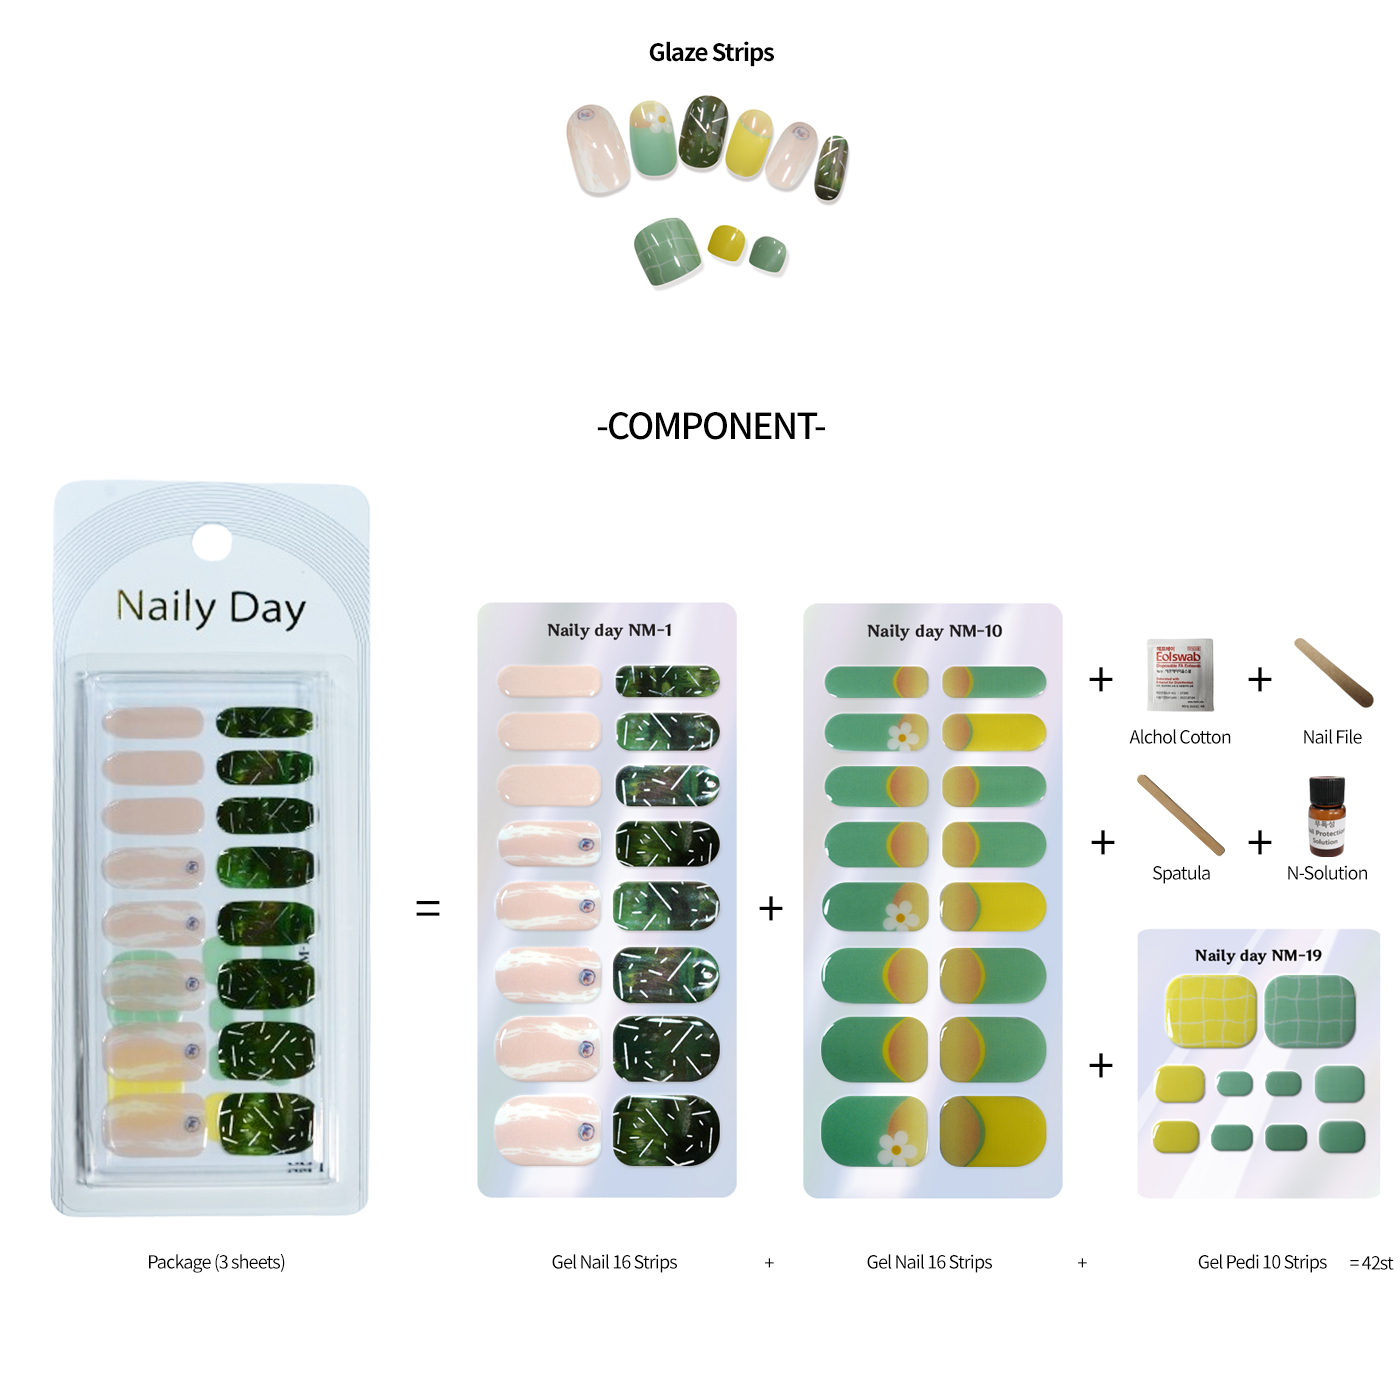 Nail Product Composition Image